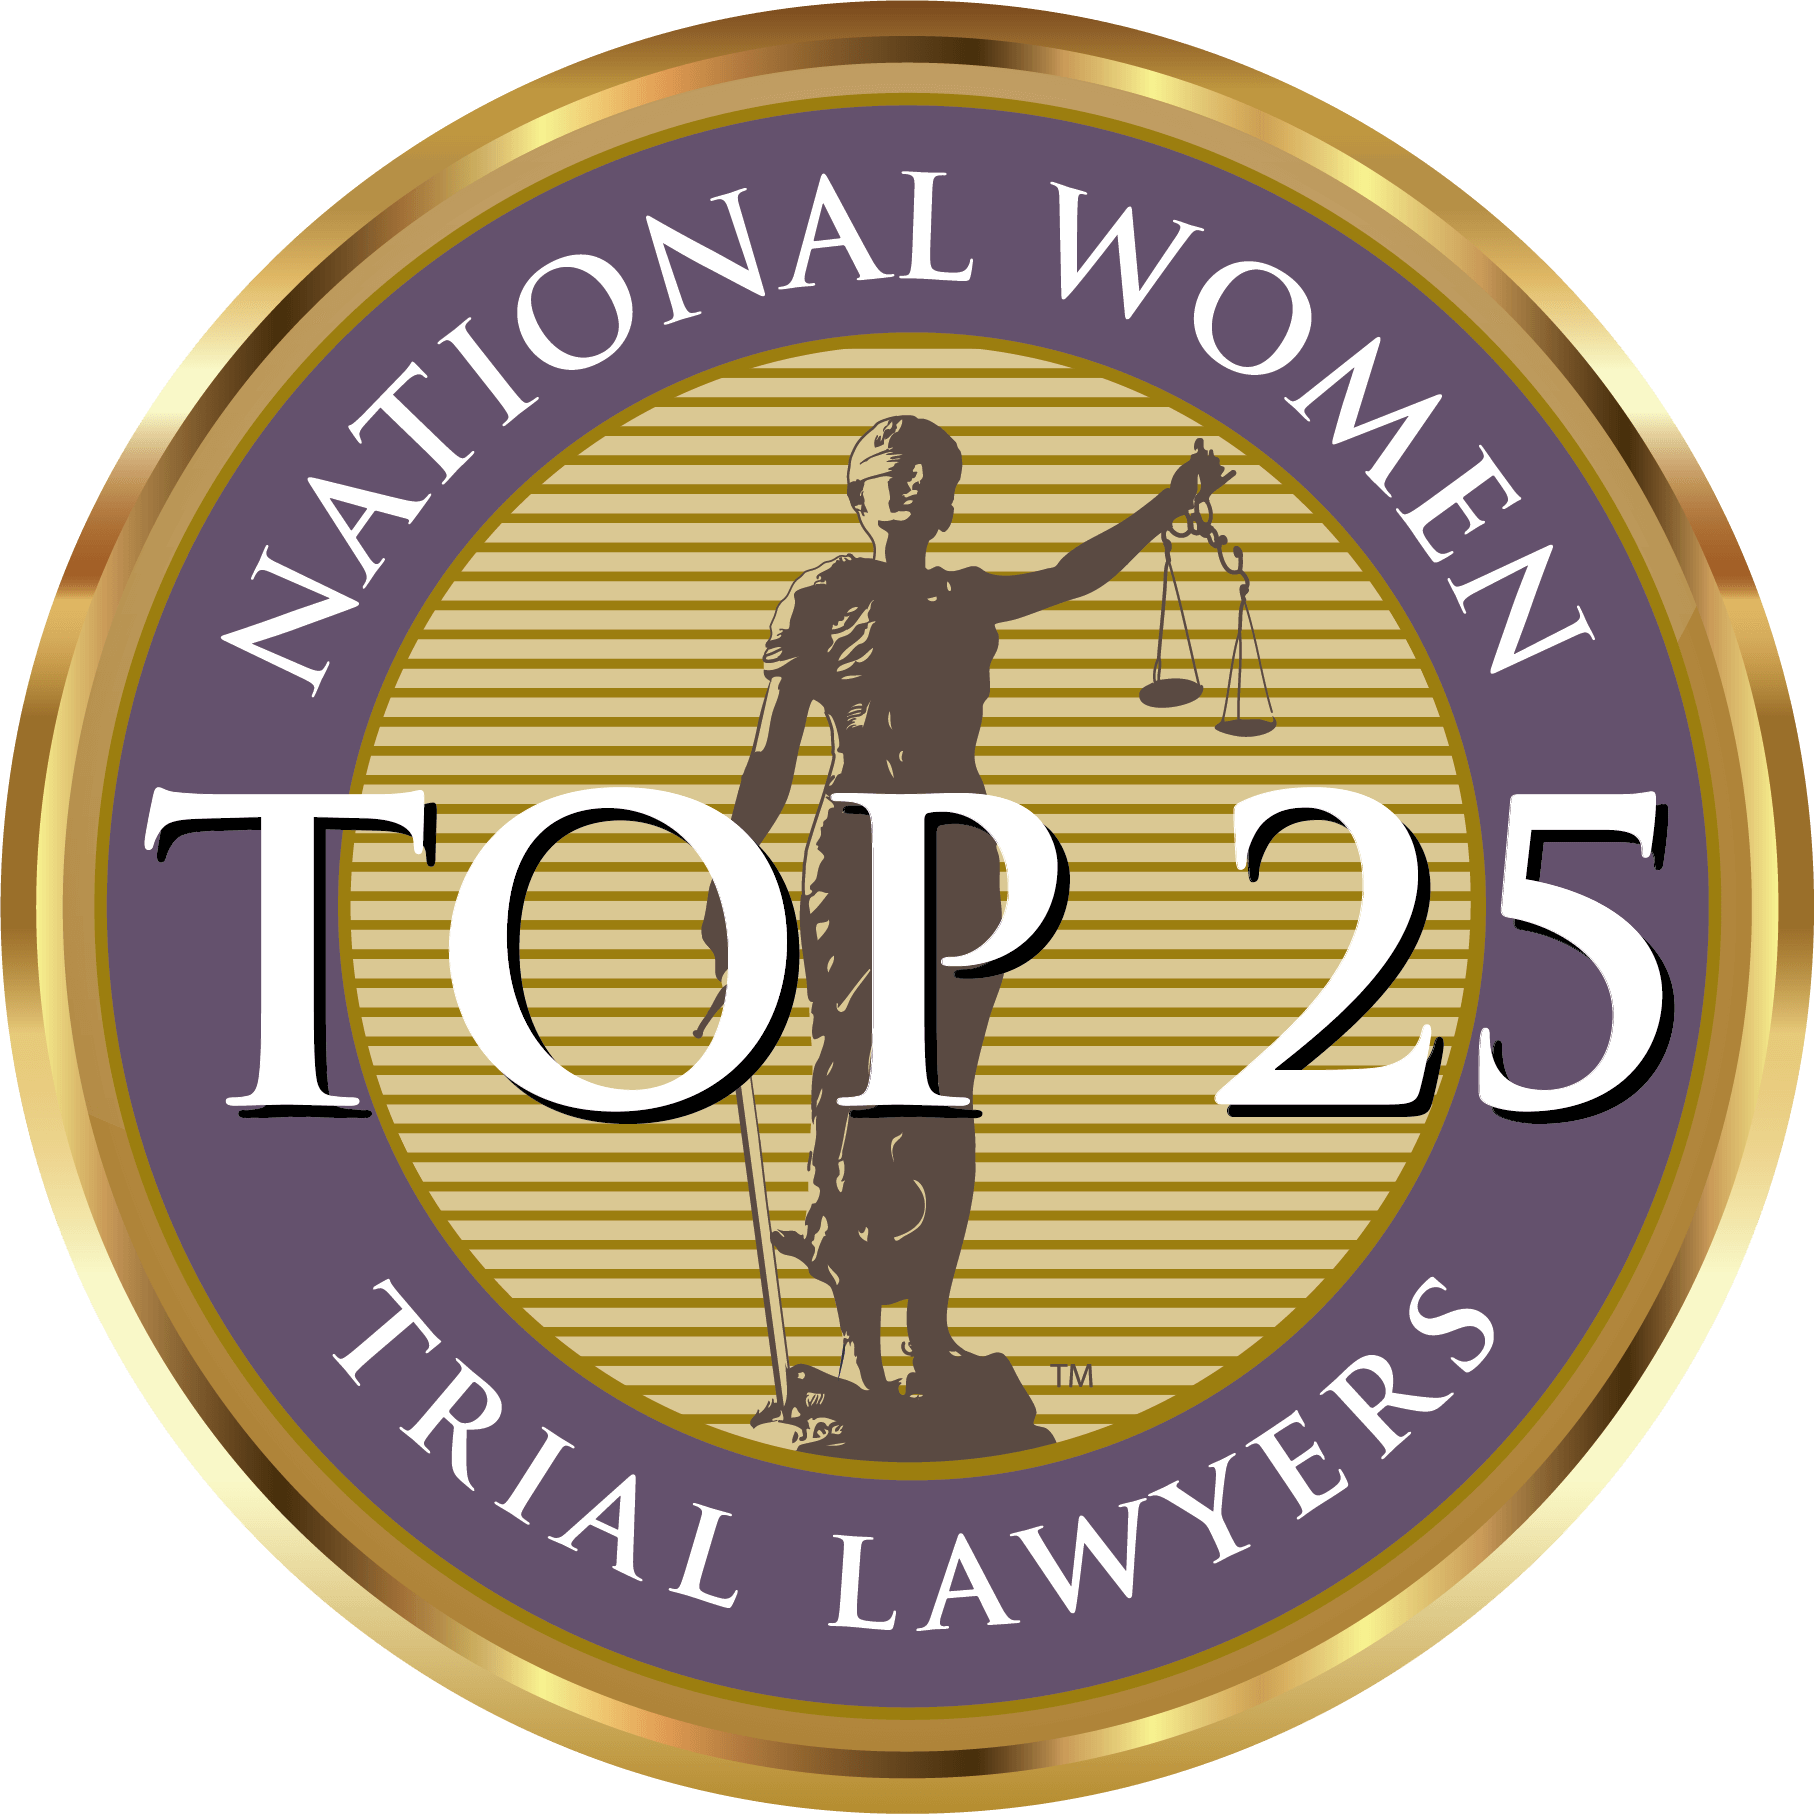 Top 25 National Women Trial Lawyers